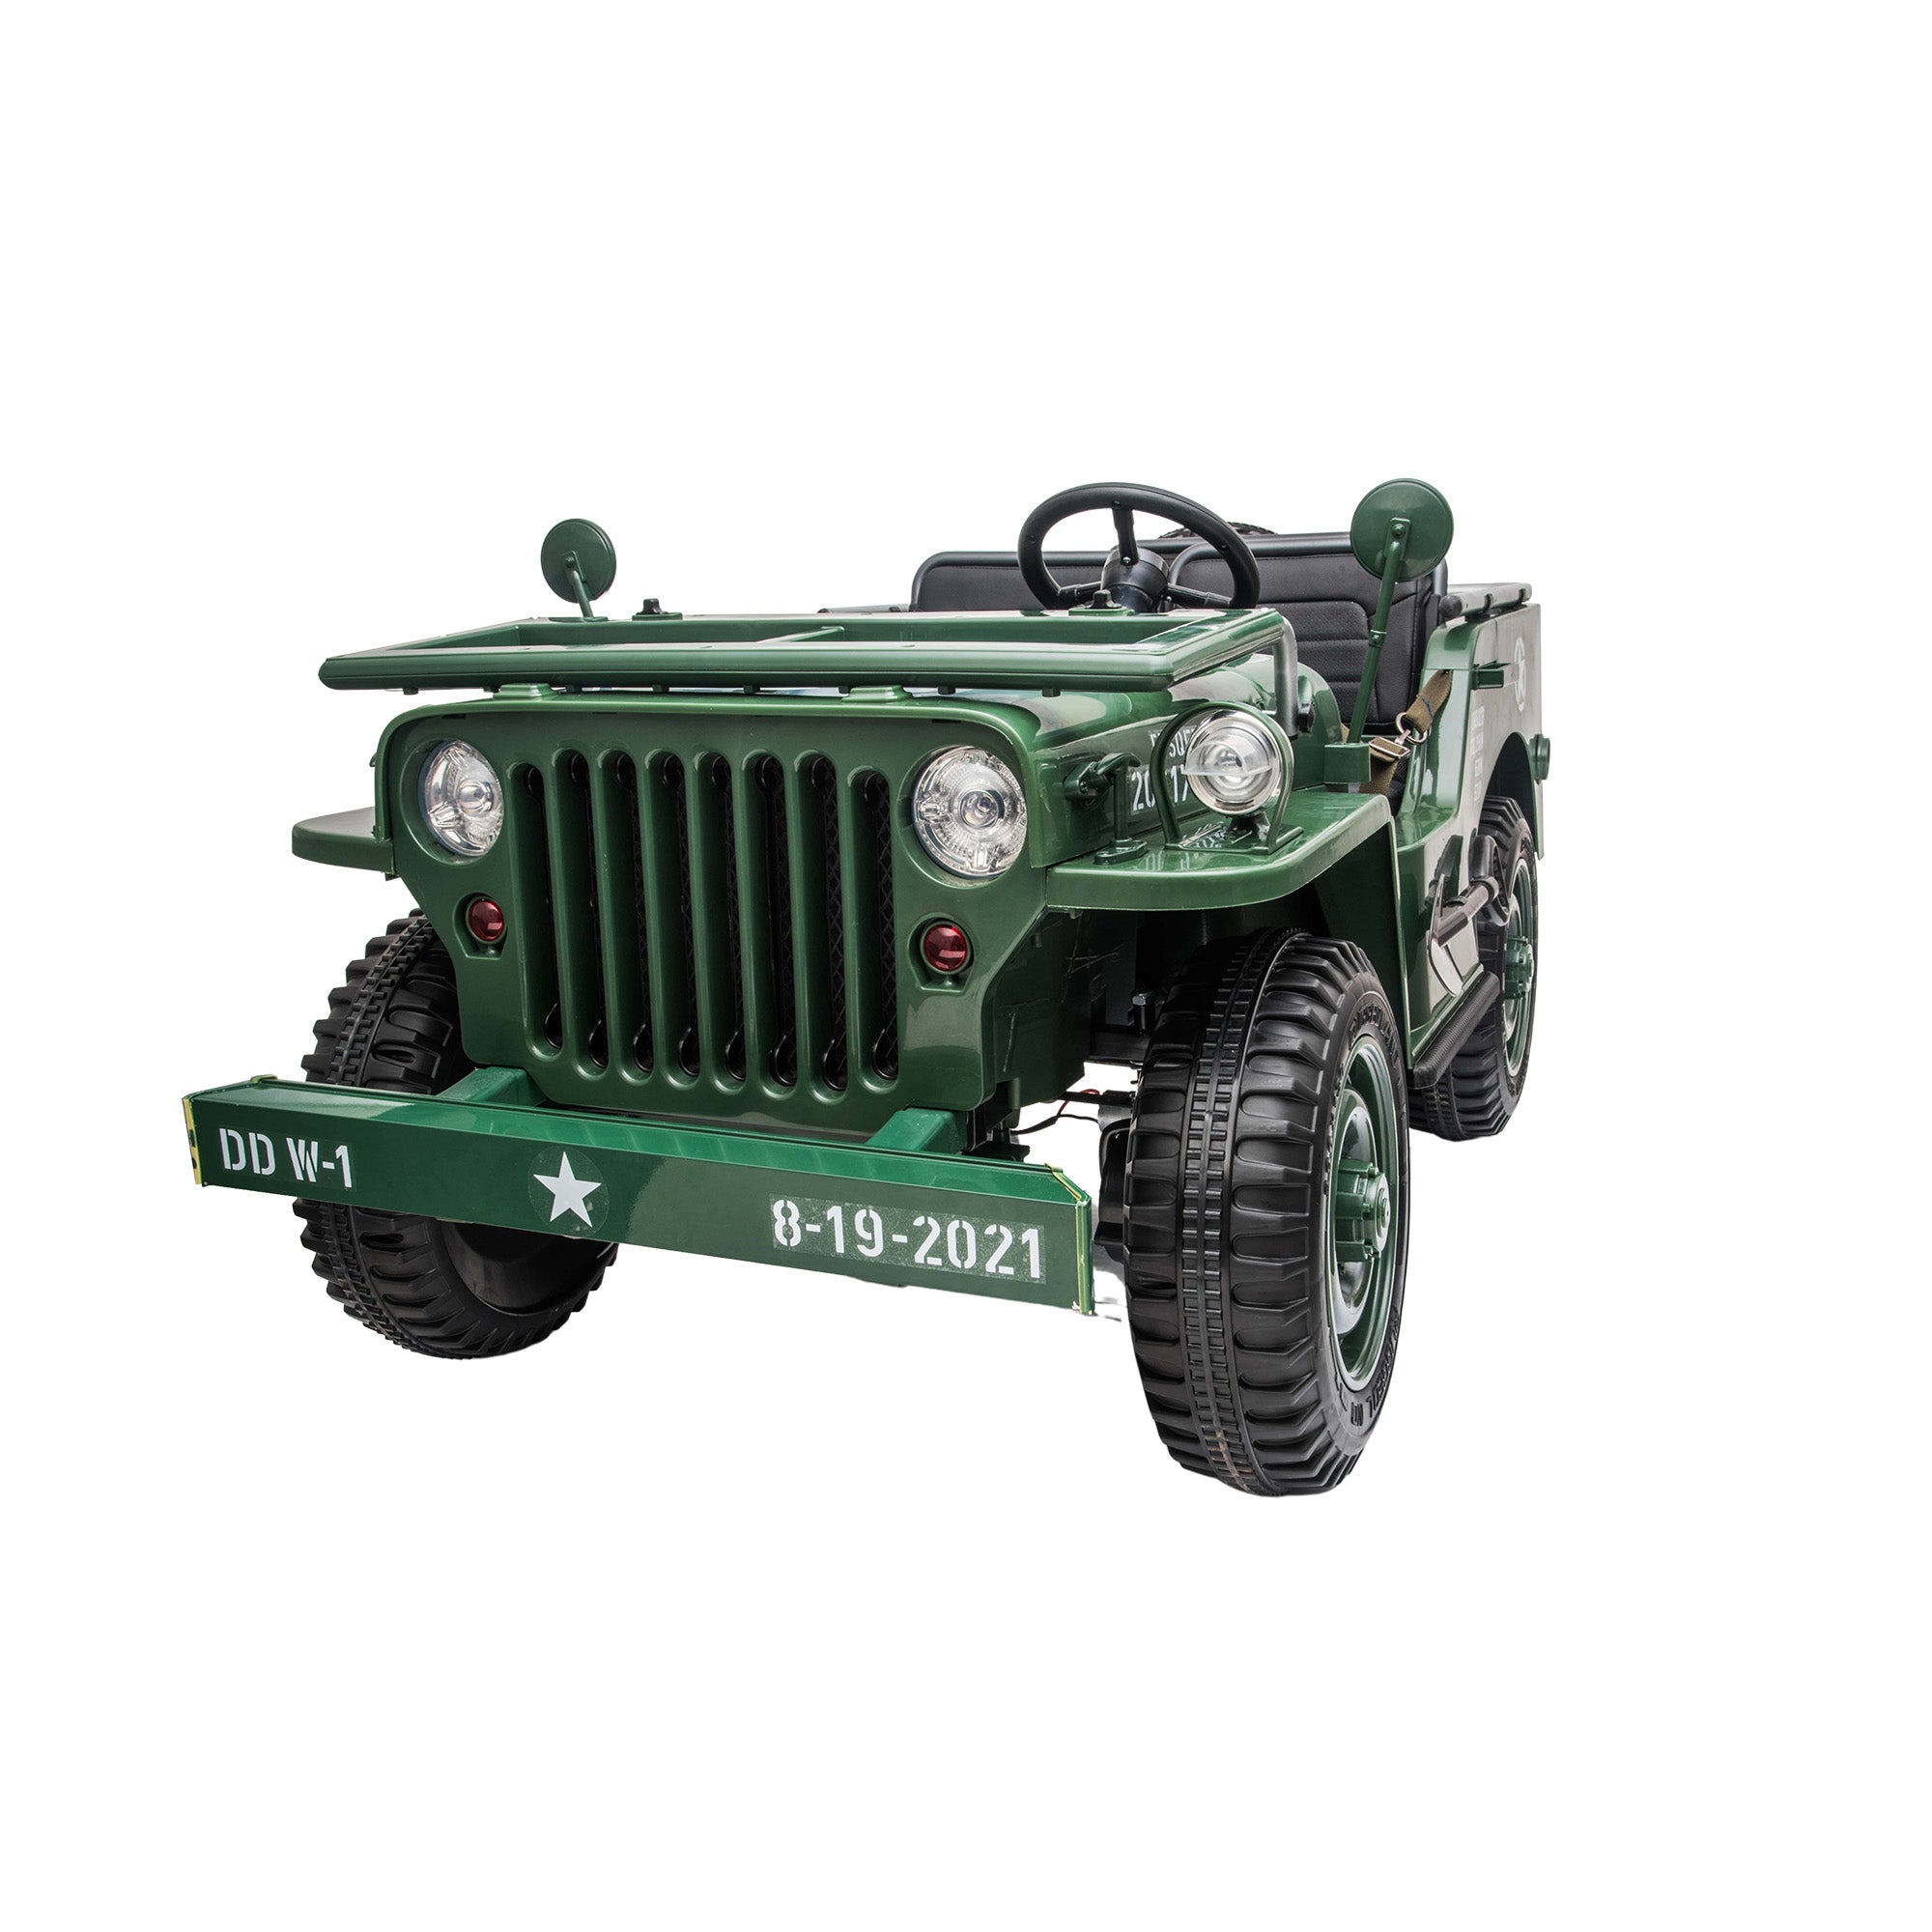 Kids-12V-14AH-Electric-Ride-On-Jeep-Car-Army-4x4-Battery-Operated-Car-20.jpg